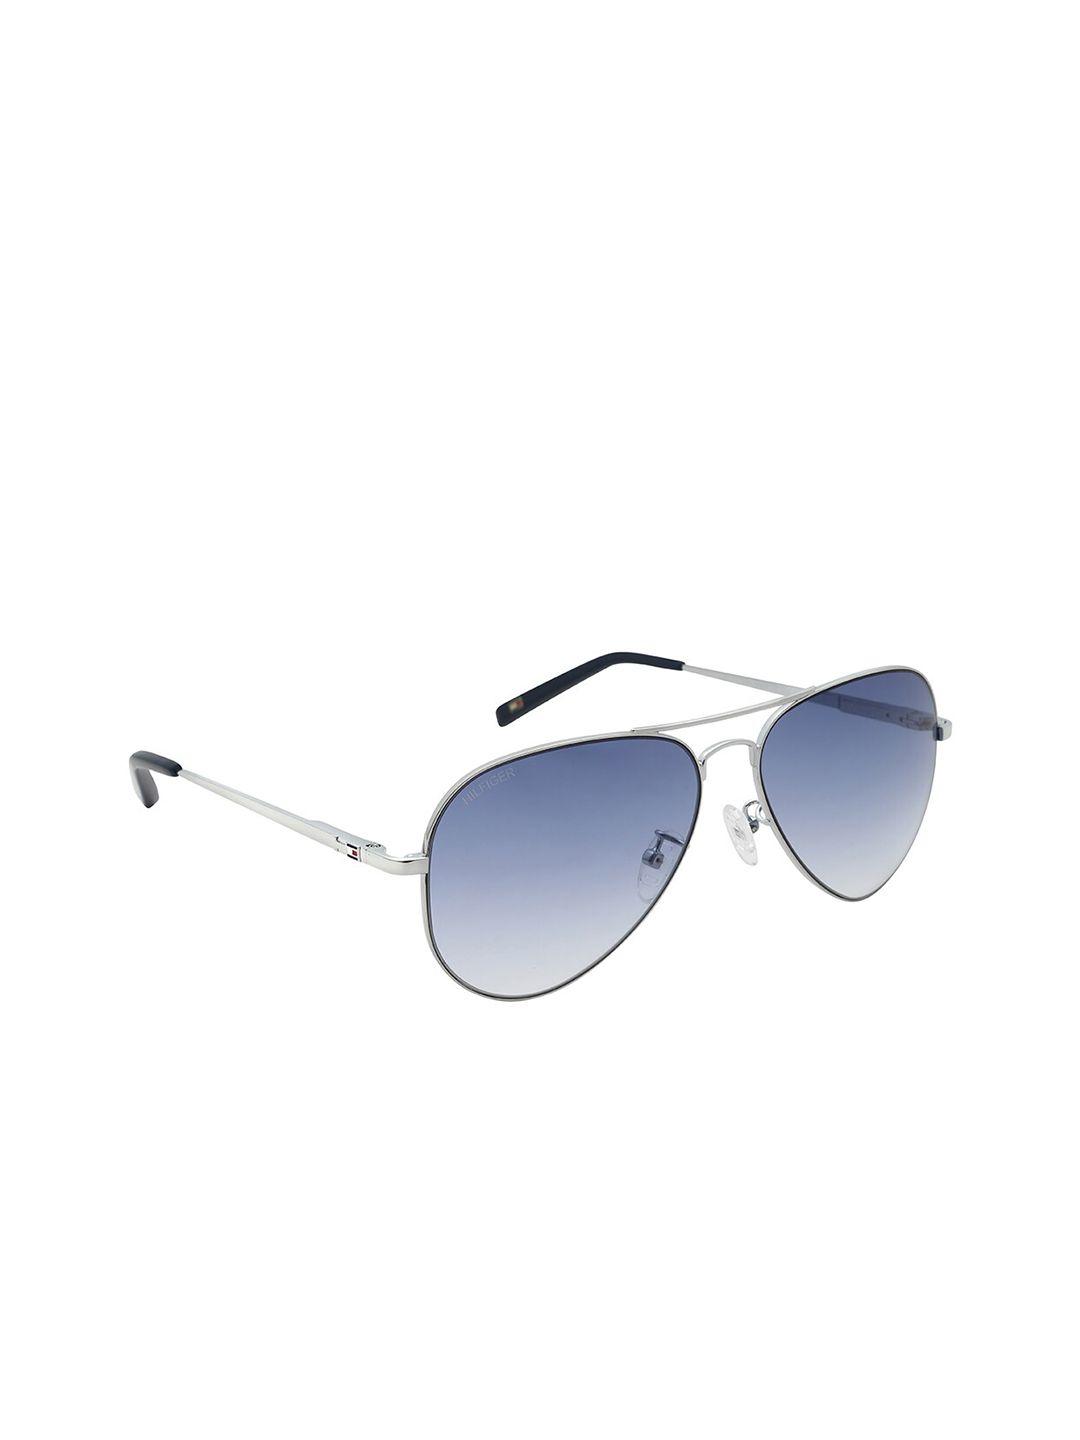 tommy-hilfiger-unisex-blue-lens-&-silver-toned-aviator-sunglasses-th-marco-c4